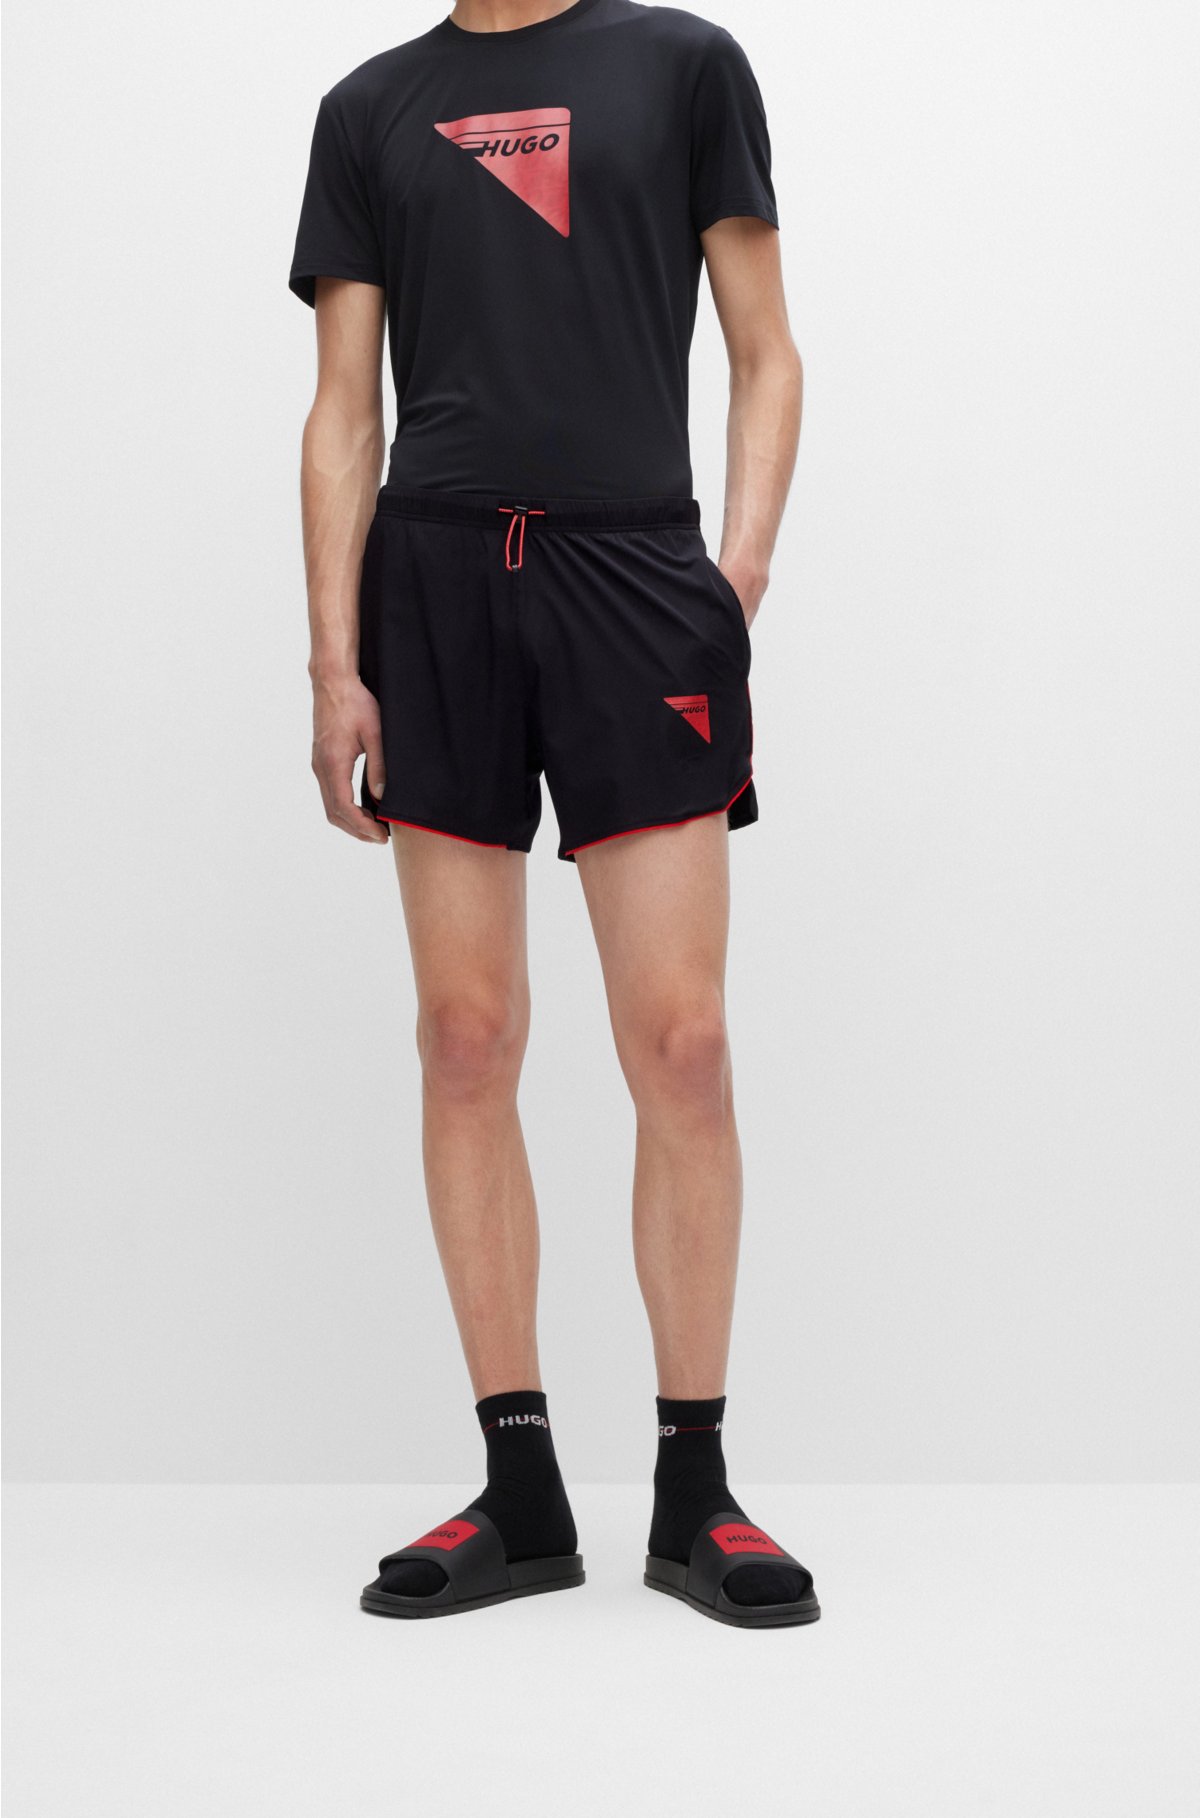 HUGO - Super-stretch shorts piping and capsule with logo